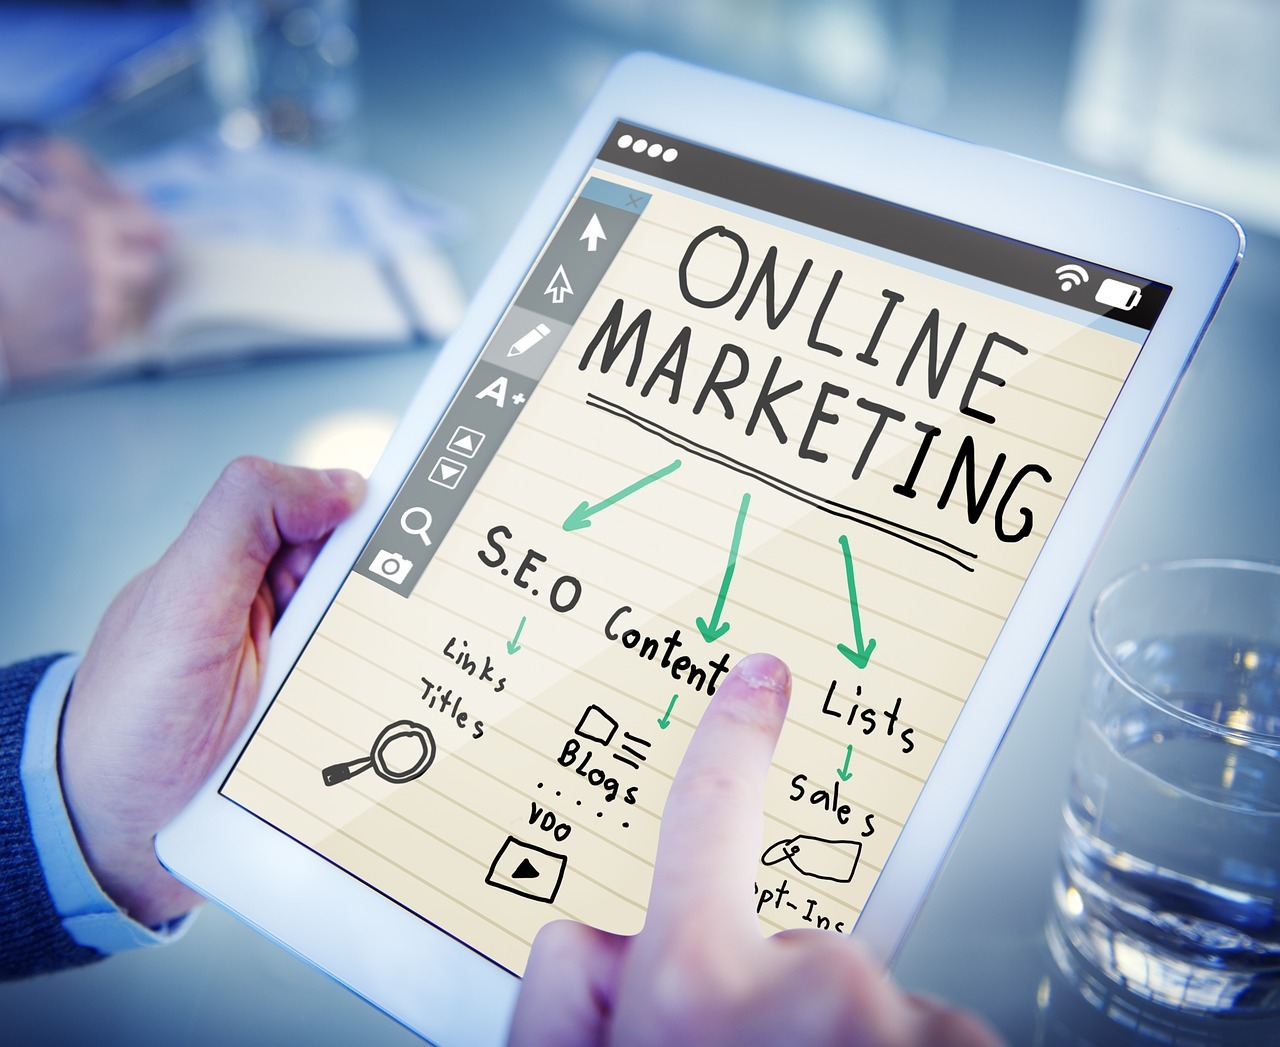 7 Types of Internet Marketing Strategies That Actually Works 2022